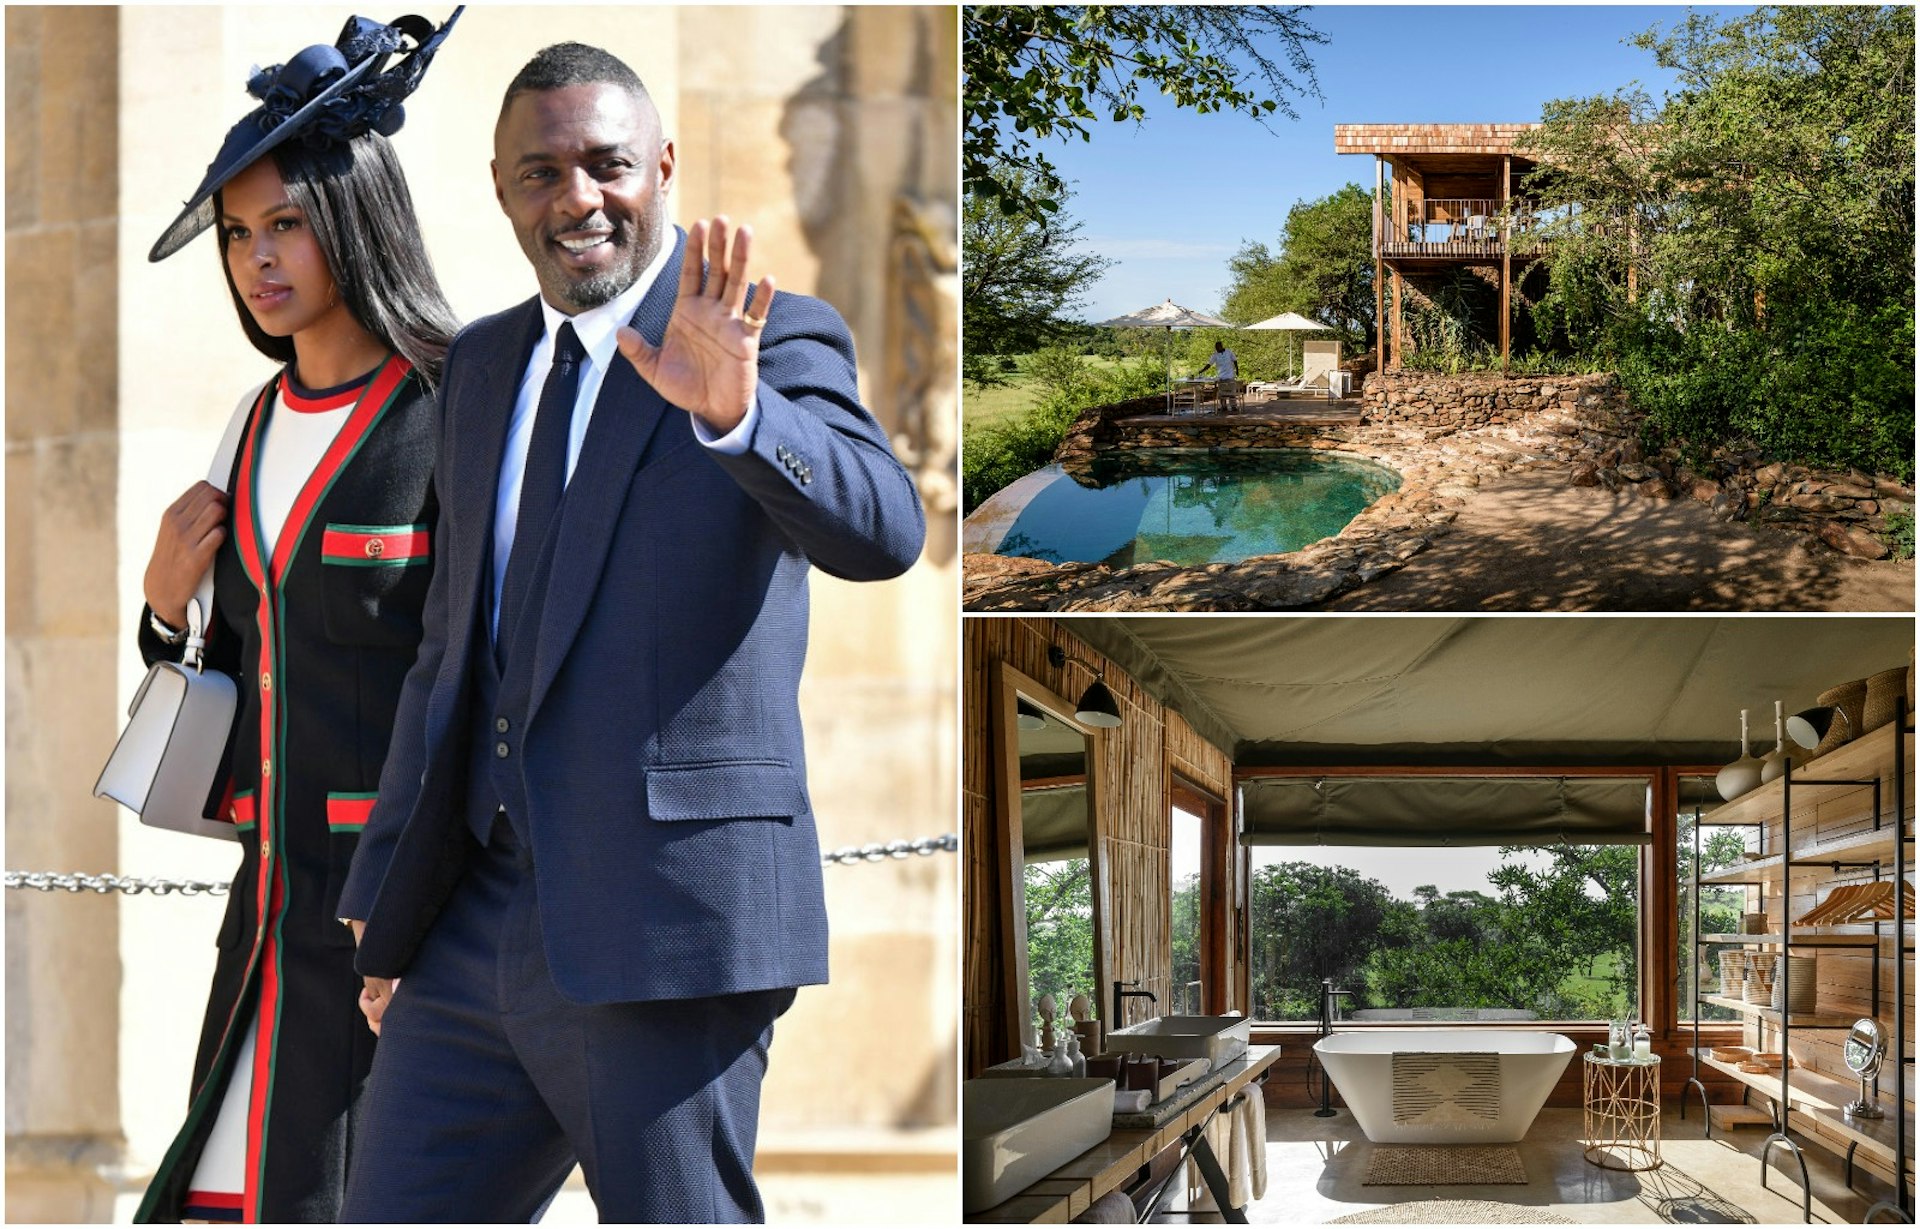 Clockwise from left: Sabrina and Idris walking into the church for Harry and Meghan's wedding while Idris waves to the camera; a side view of the Singita Grumeti lodge and open air pool looking out on the countryside; the luxury bathroom with the bath under a large window in the lodge.